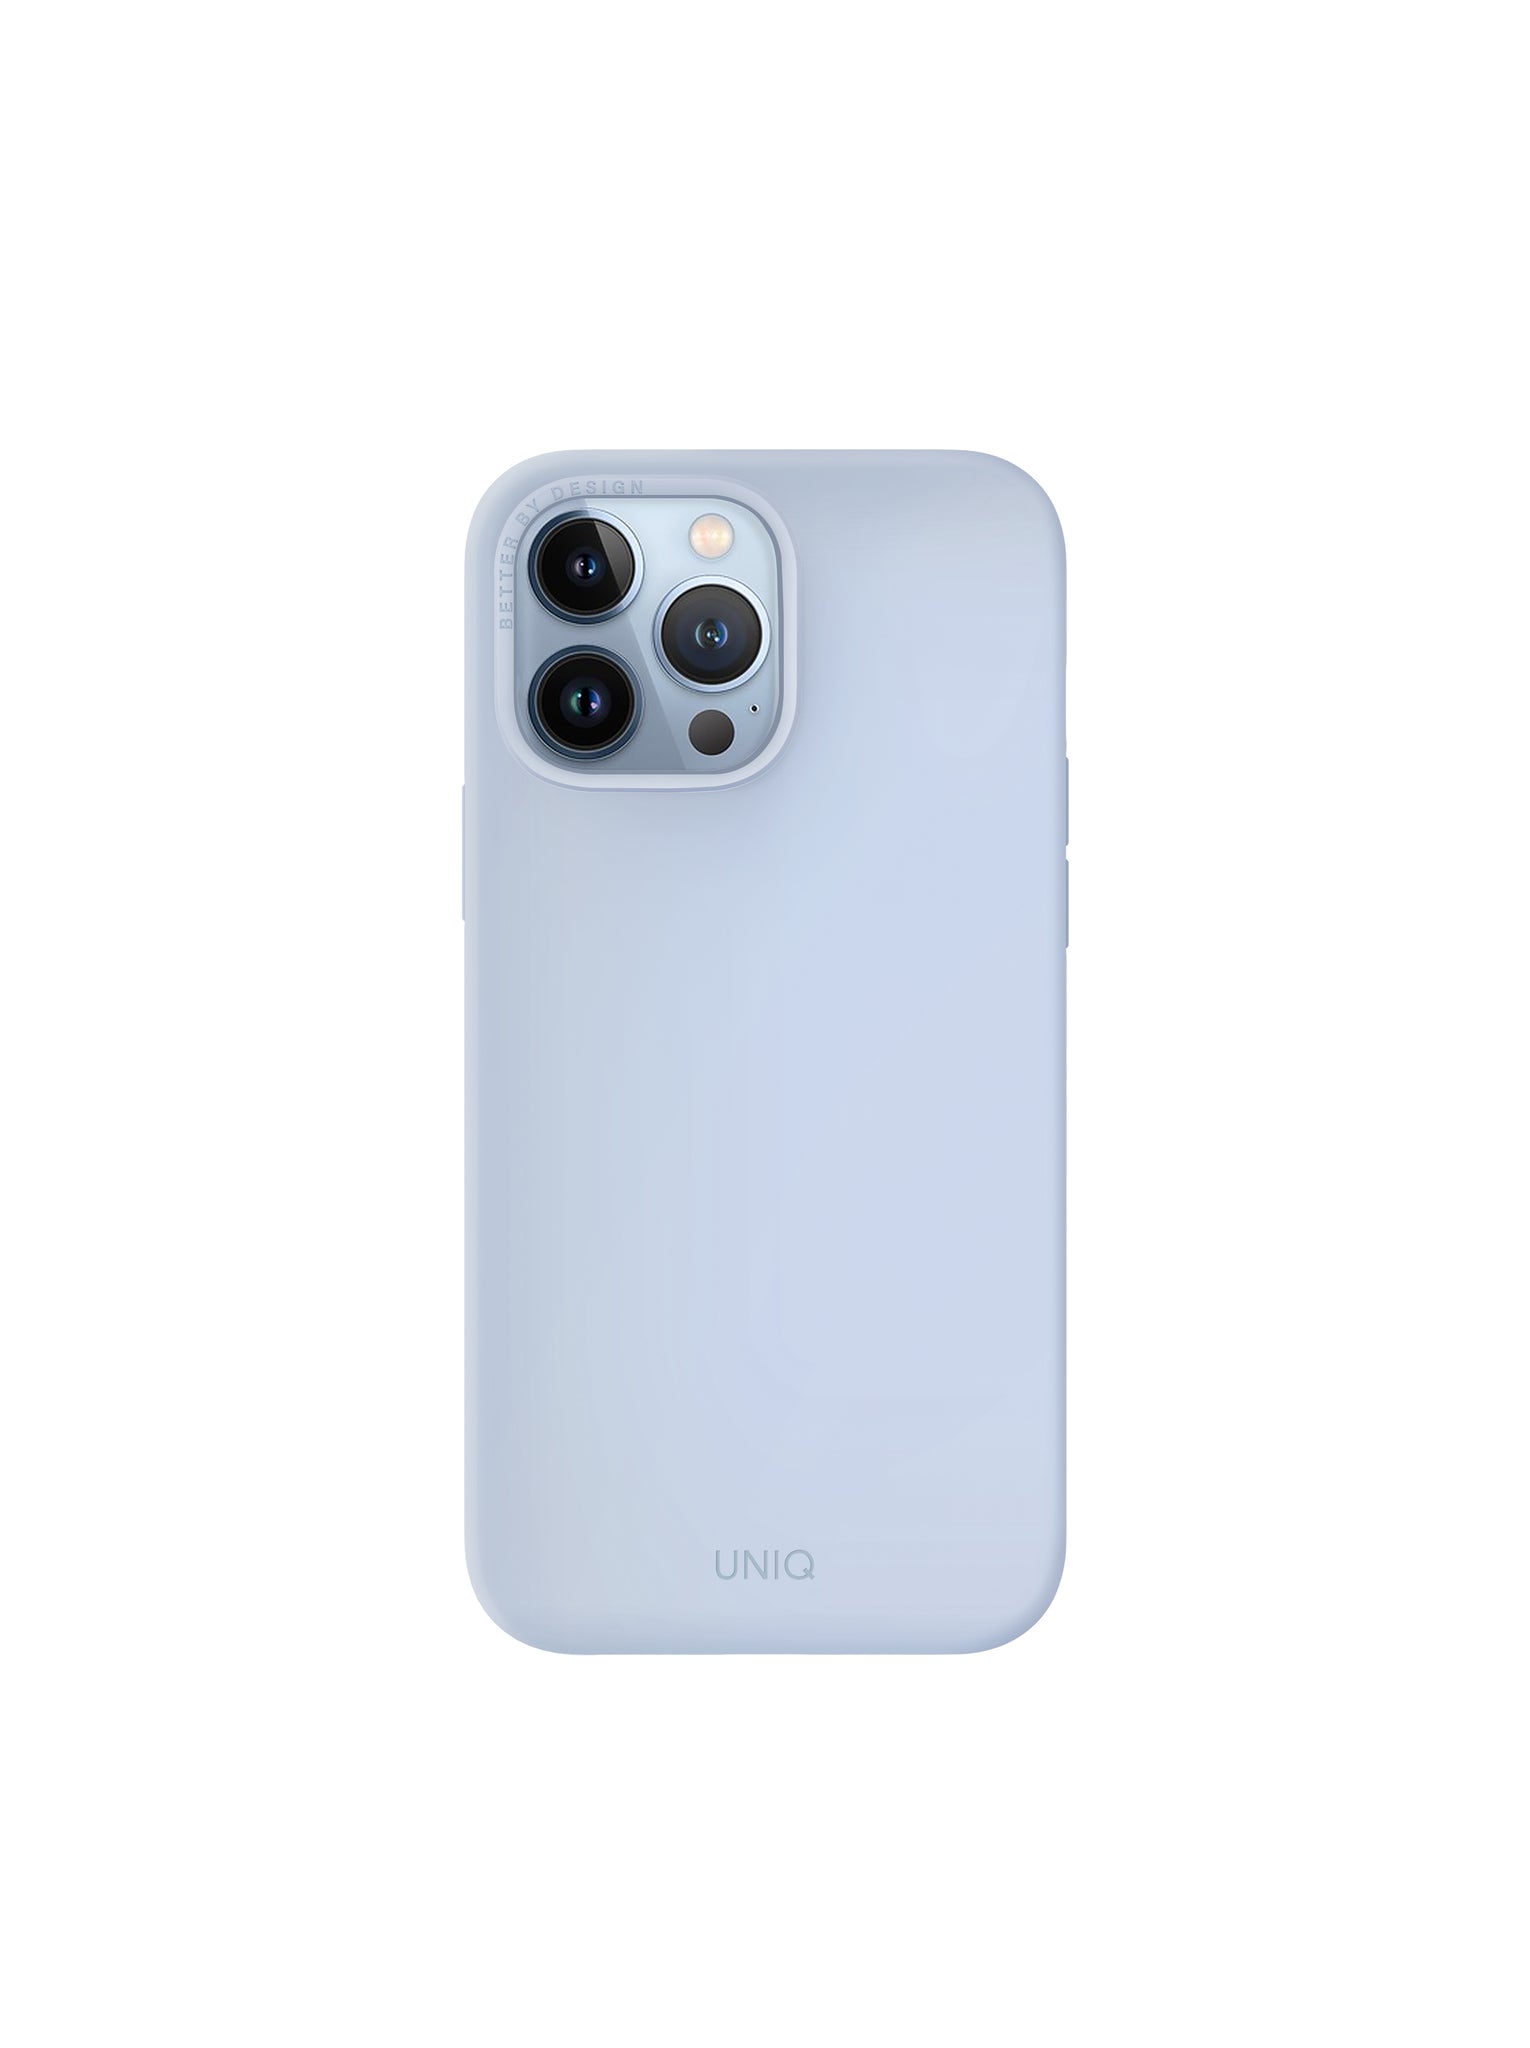 Uniq Iphone 13 Pro Max Hybrid Lino Hue Mobile Cover / Case  with Magsafe Compatibility- ARCTIC BLUE (ARCTIC BLUE) - كفر سليكون مع مق سيف من شركة يونيك